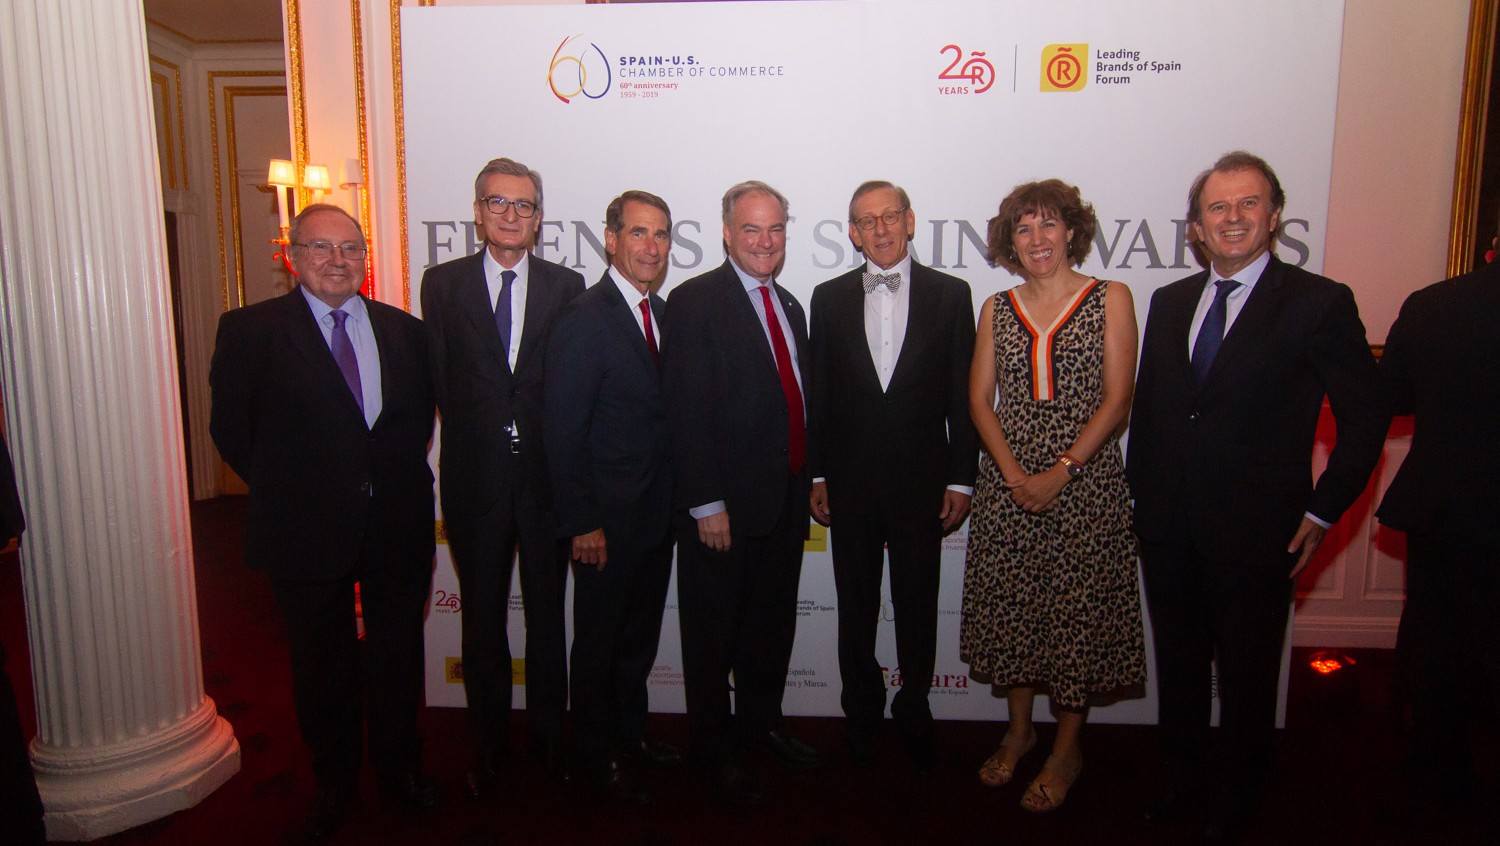 Friends of the Spain Brand and of Spanish Brands in the U.S.